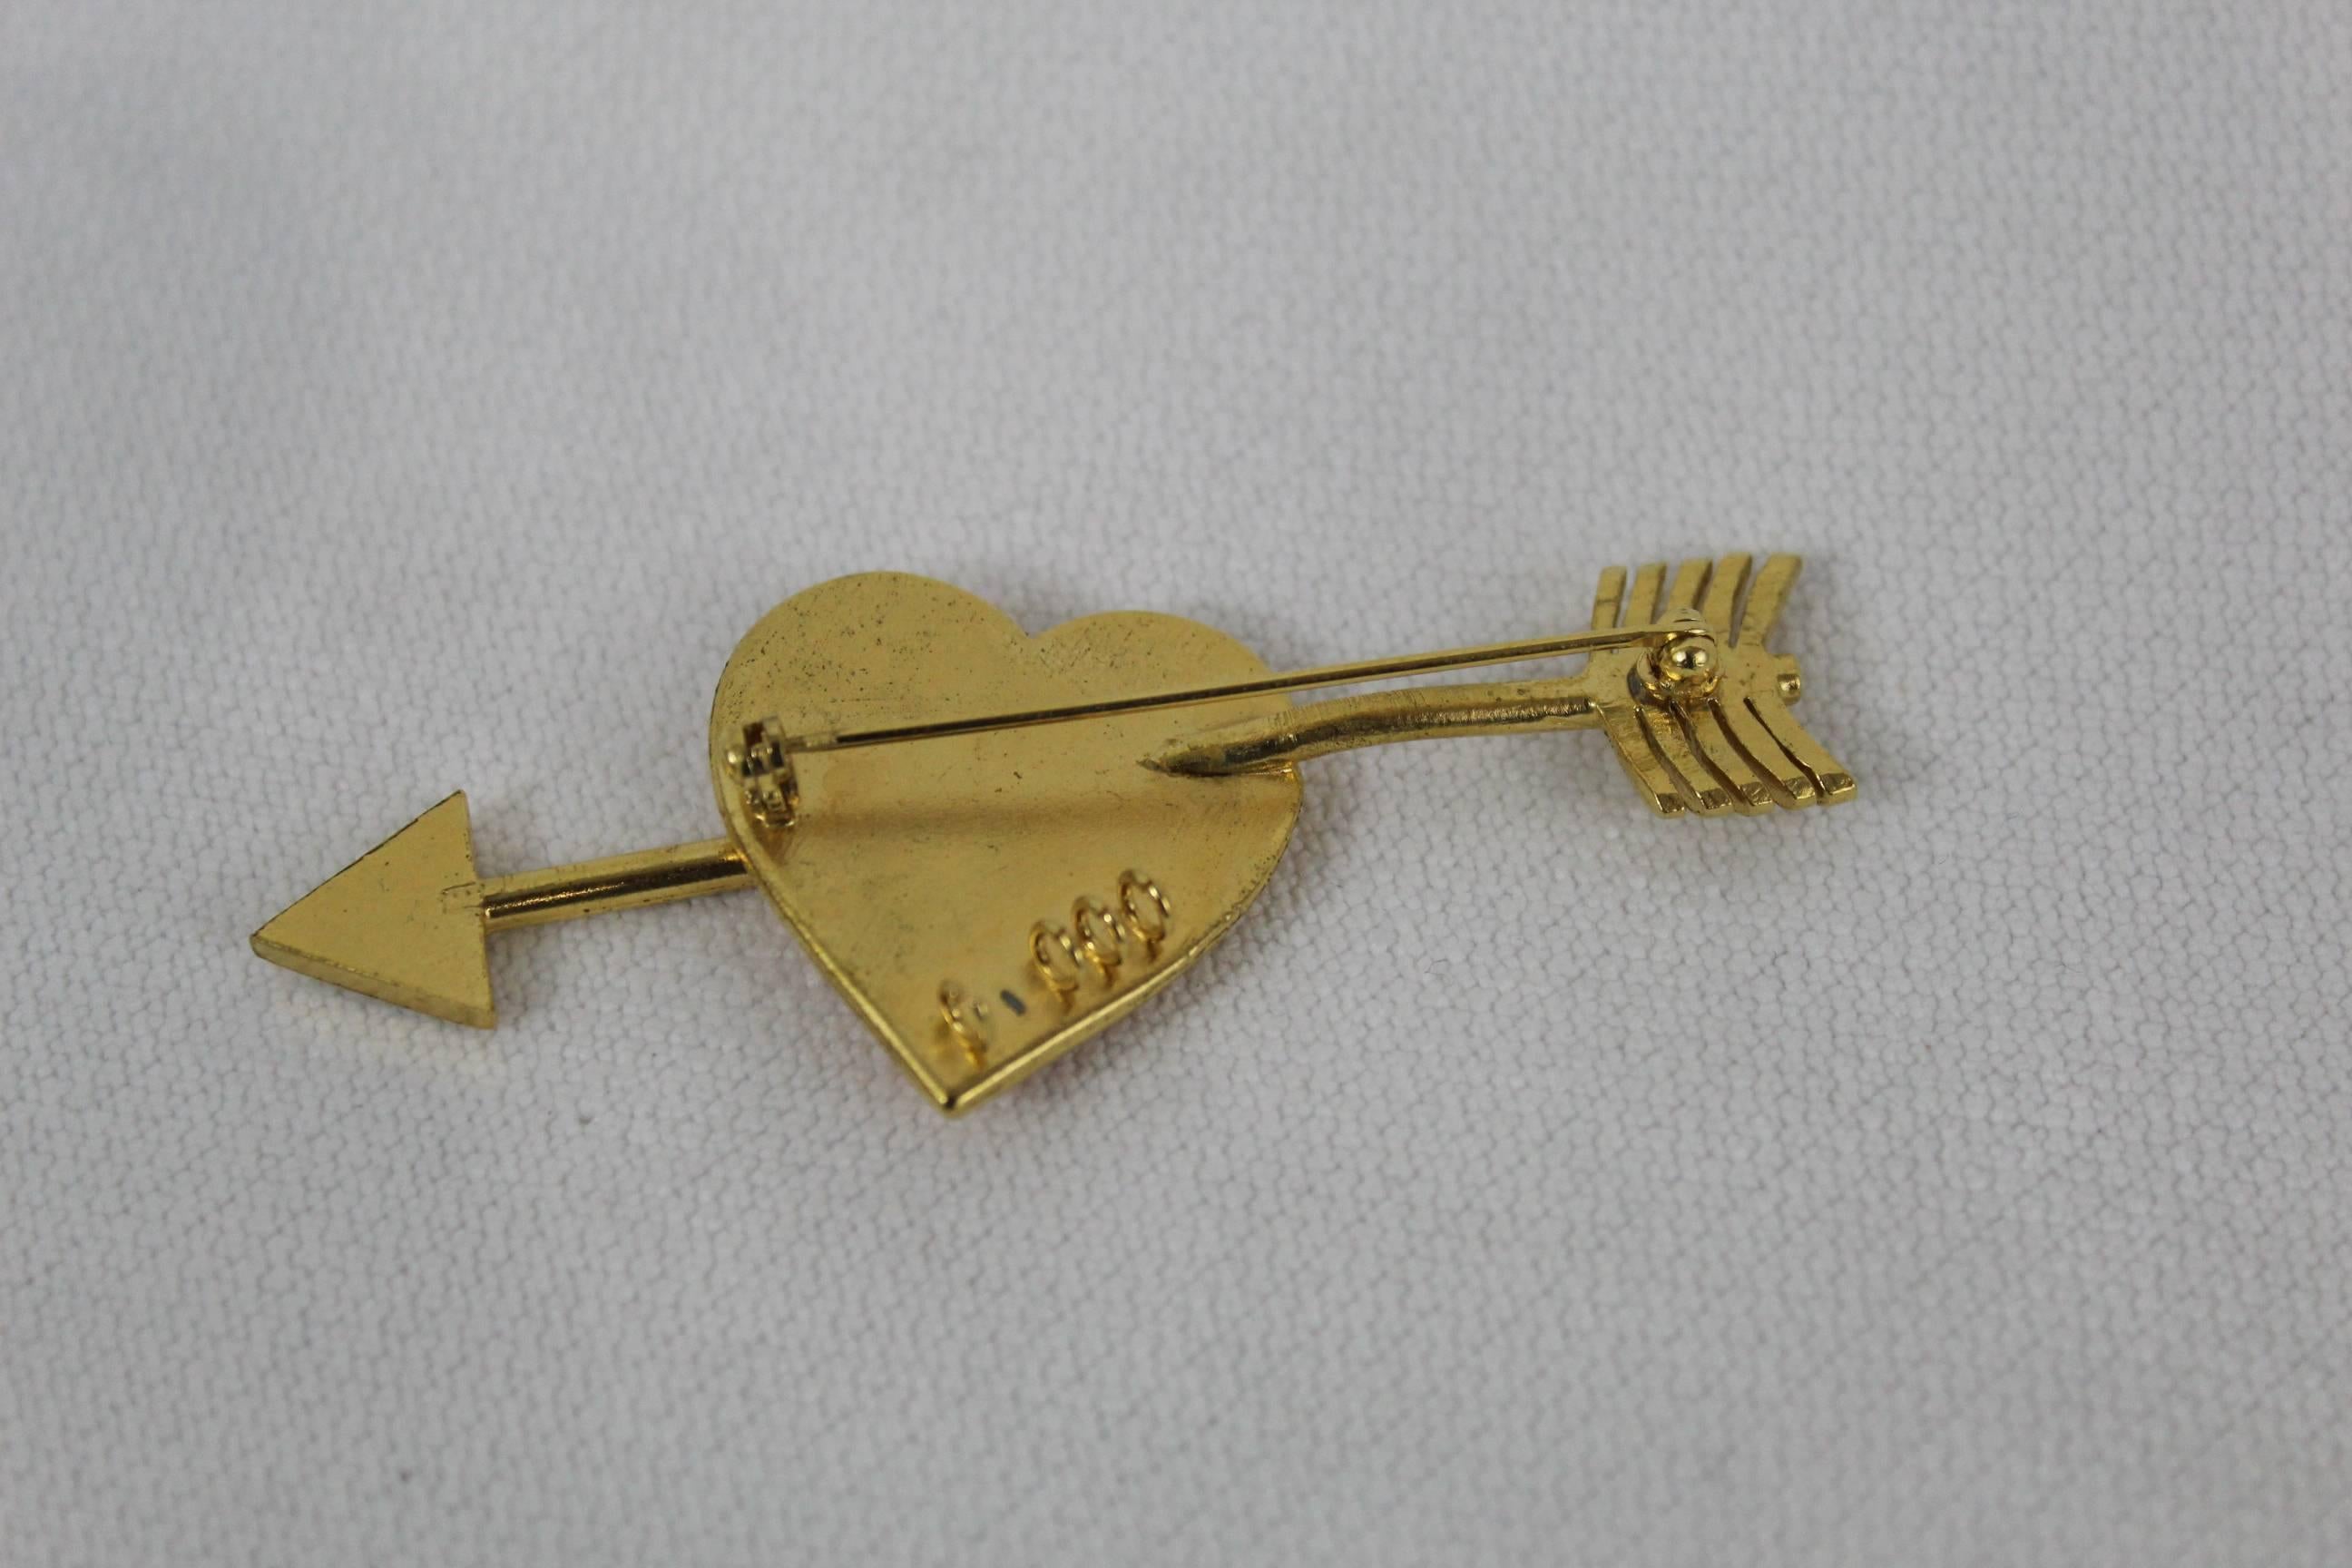 Really nice Chanel Brooche with the shape of a heart and arrow. Originally there were some charms hanging that has been retired by its previous owner.

Good overall condition.